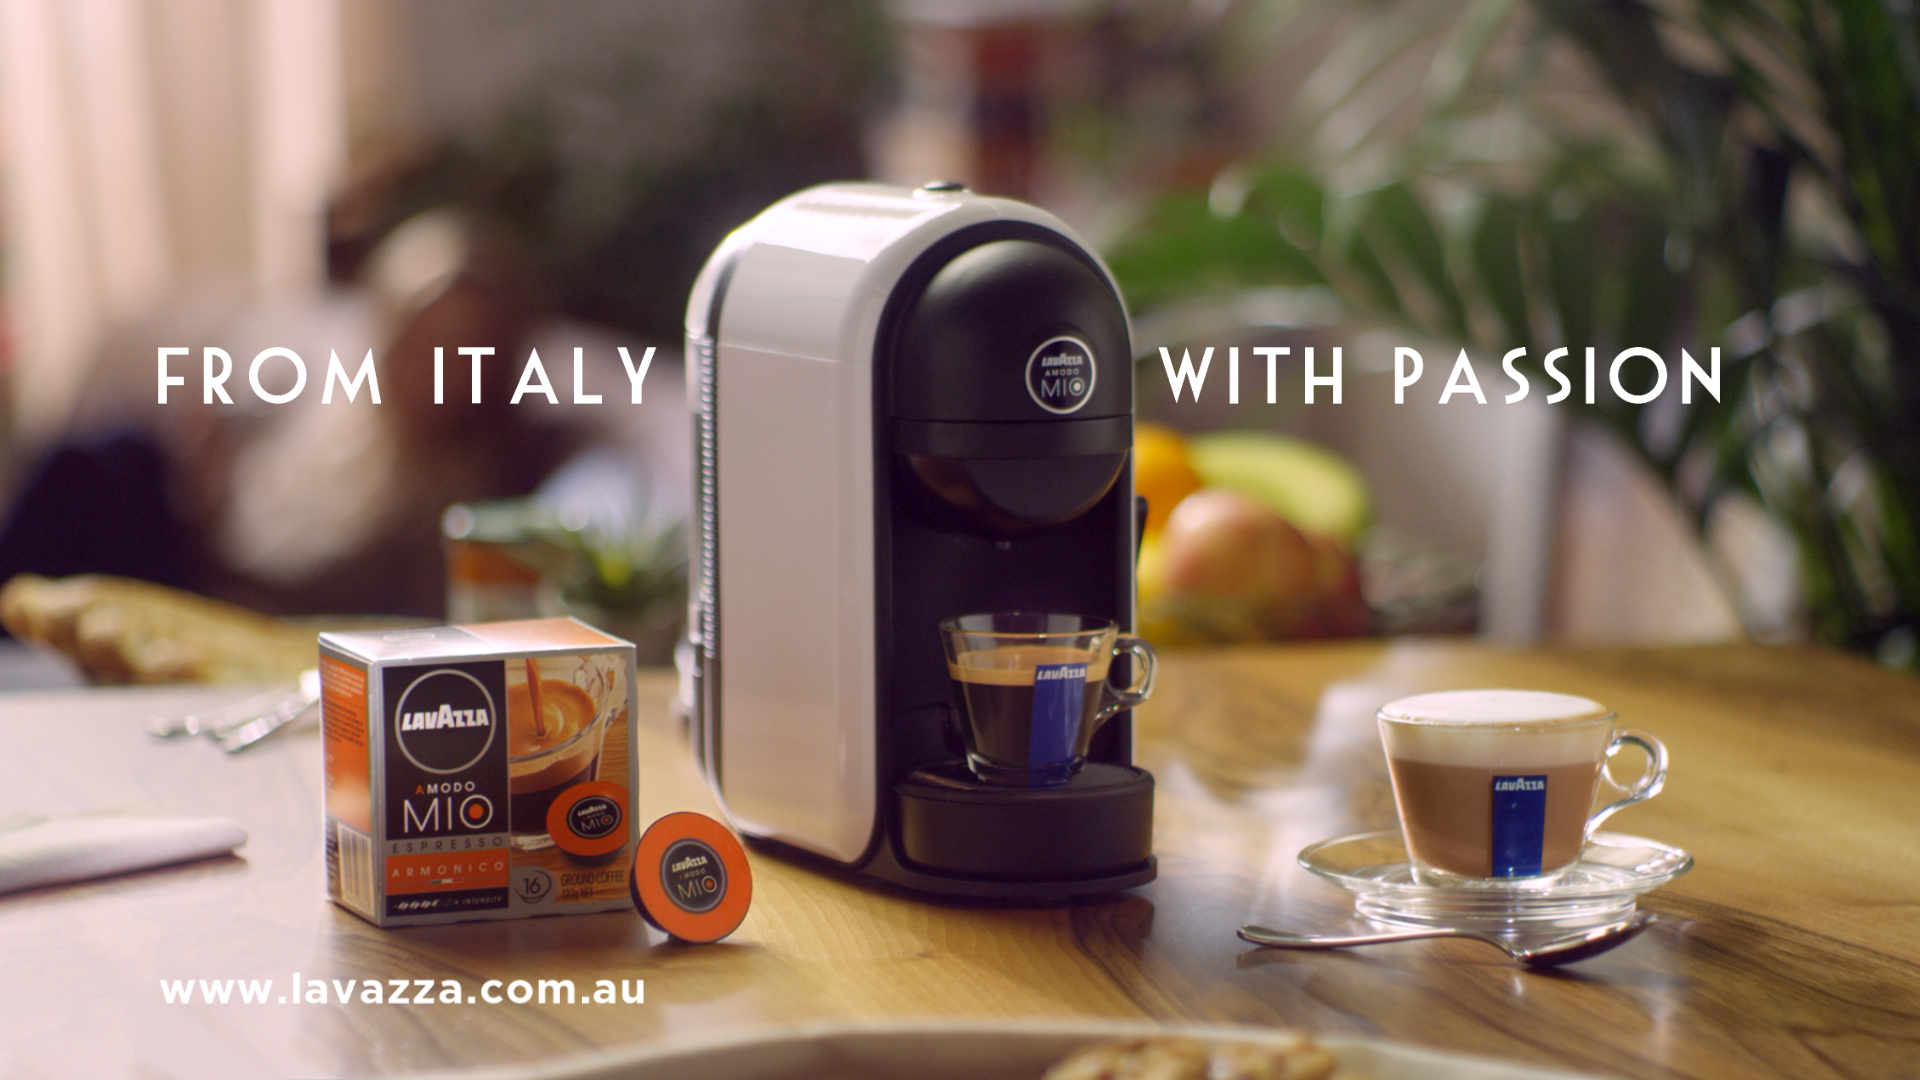 LAVAZZA TAKES ITS PASSION FOR COFFEE TO AUSTRALIA